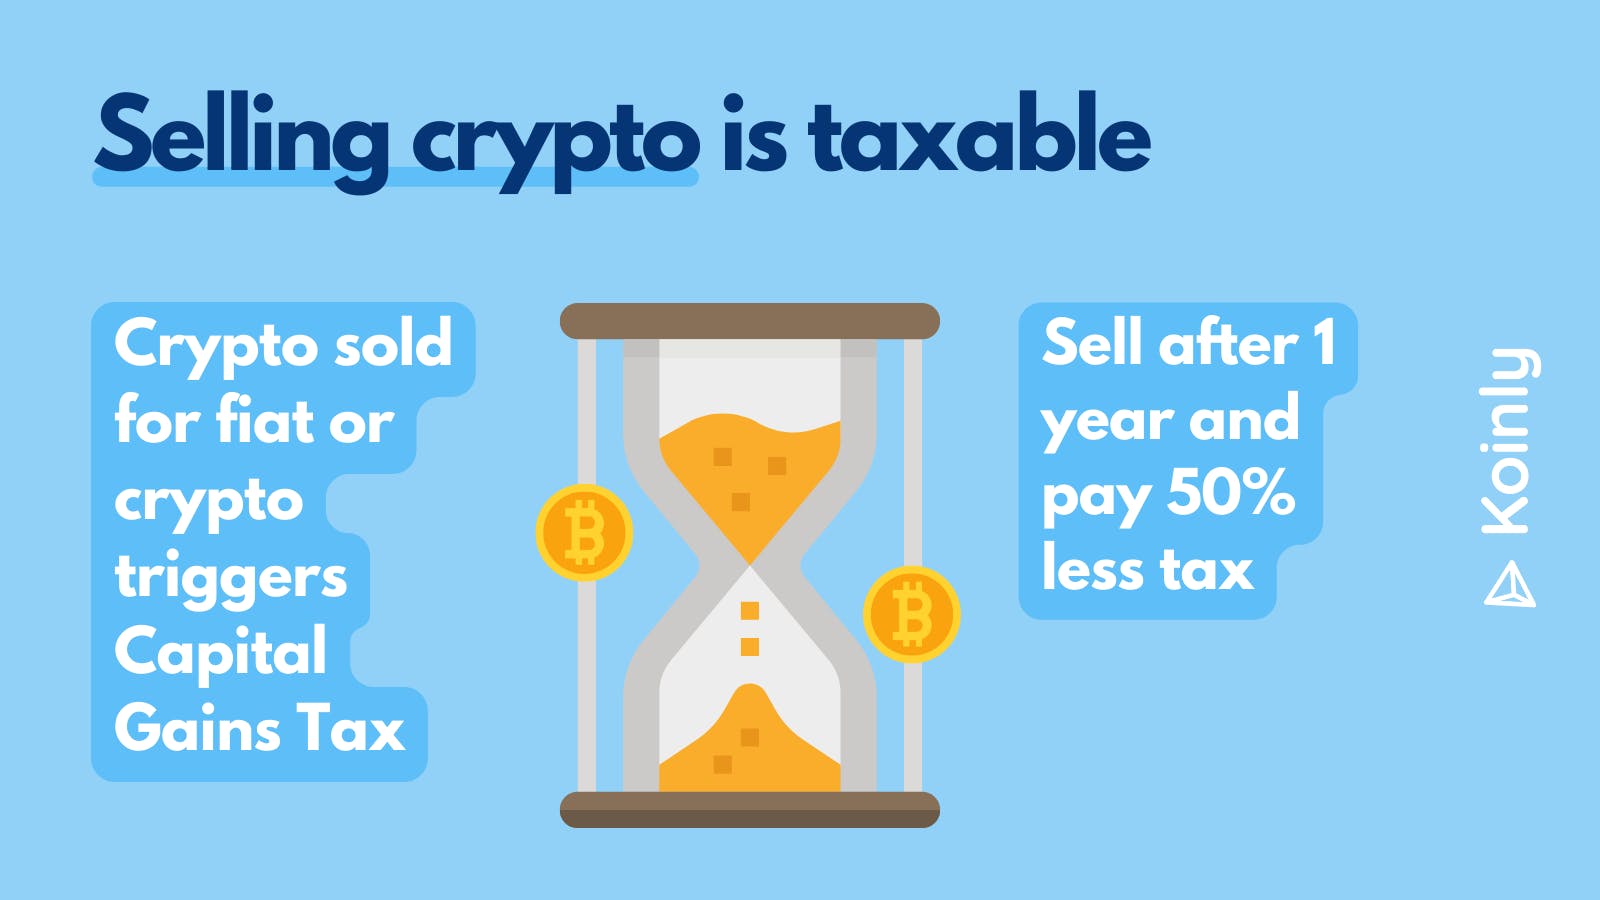 Selling crypto is taxable in Australia